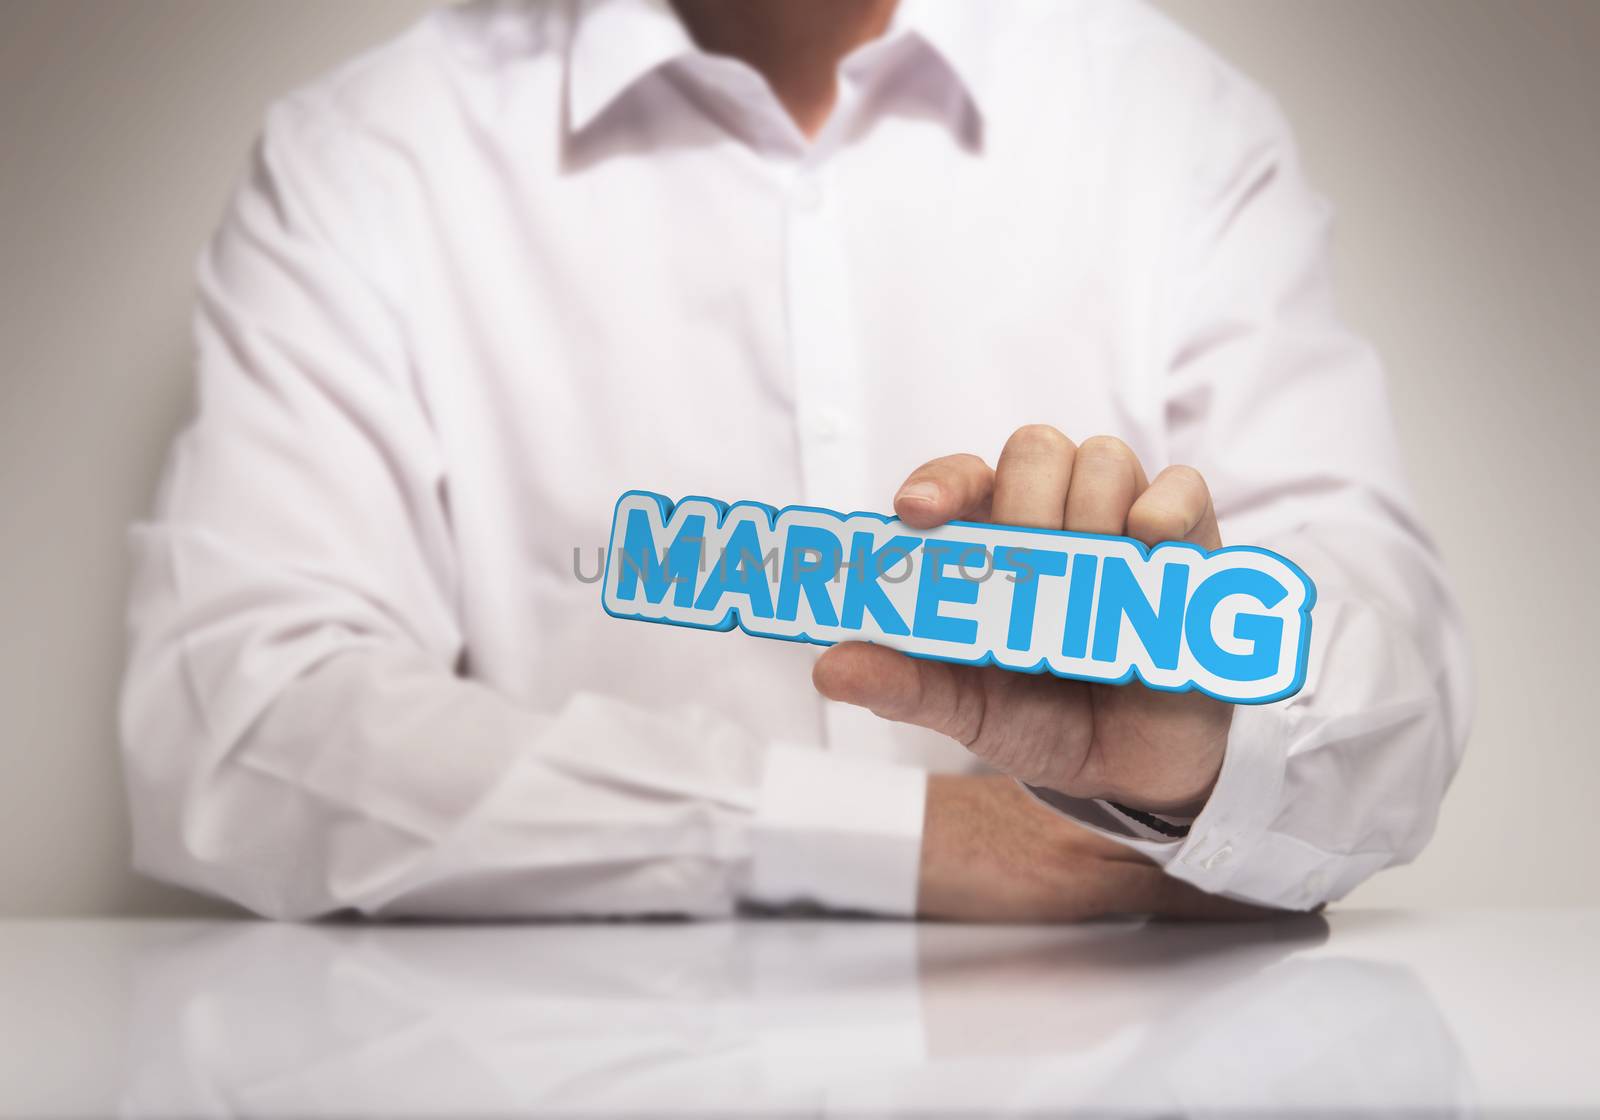 Man hand holding the word Marketing, blue and beige tones, concept image for illustration of marketing solutions